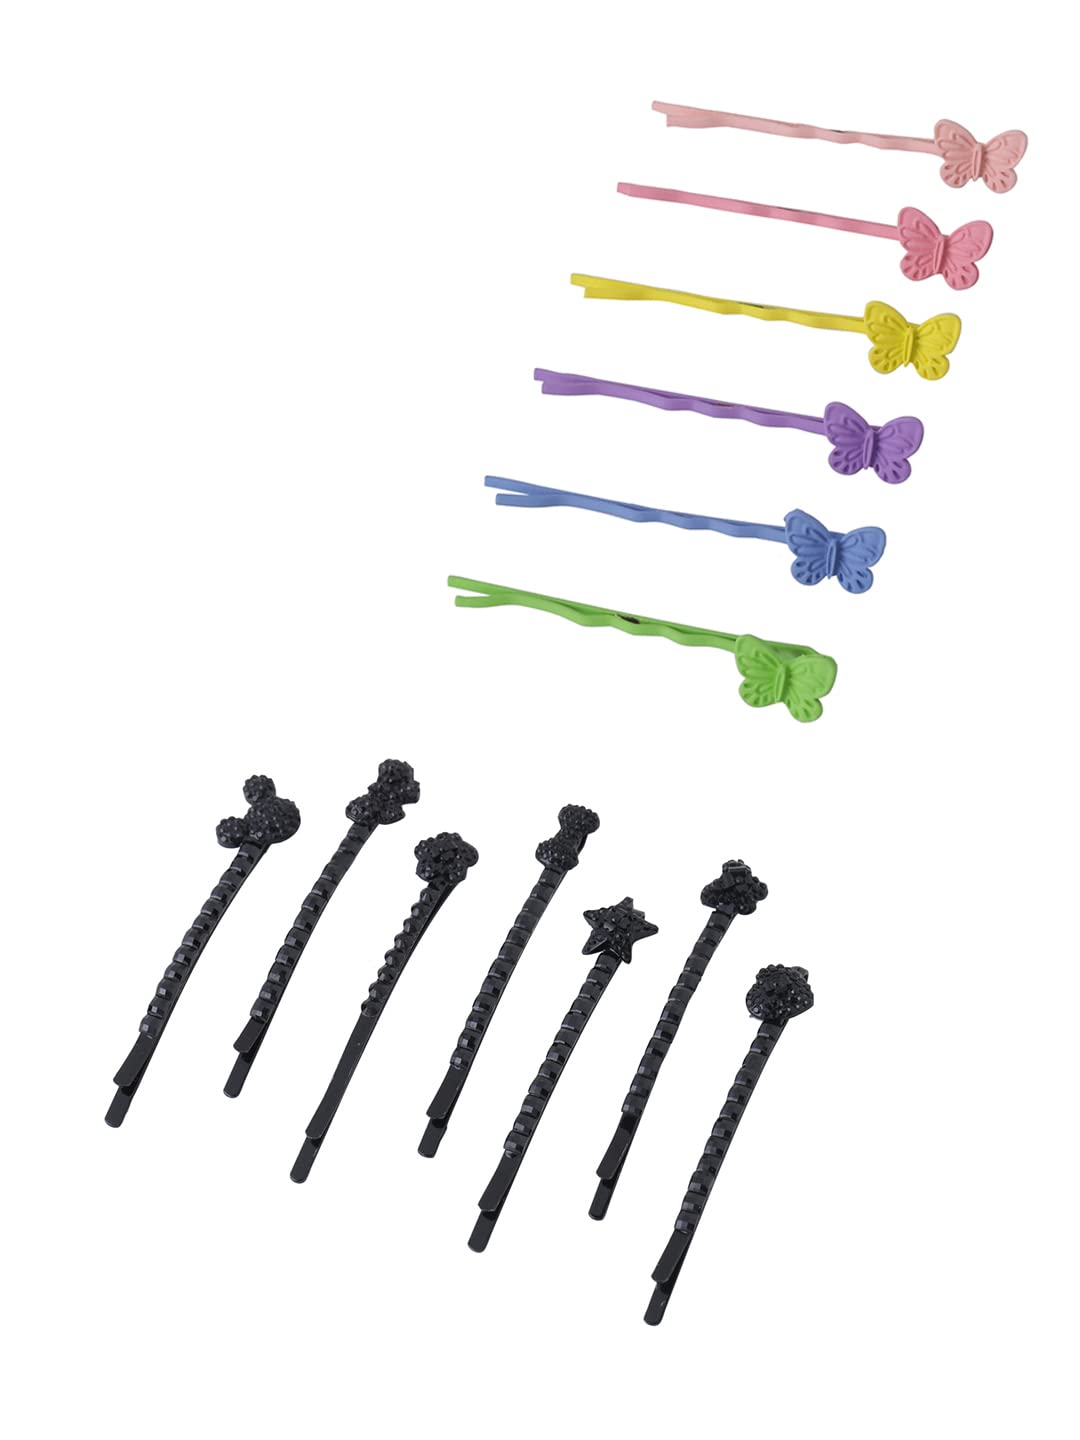 Melbees by Yellow Chimes Hair Pins for Girls Kids Hair Accessories for Girls Hair Pin 13 Pcs Bobby Pins for Hair Multicolor Charm Hairpin Bobby Hair Pins for Girls Kids Teens Toddlers